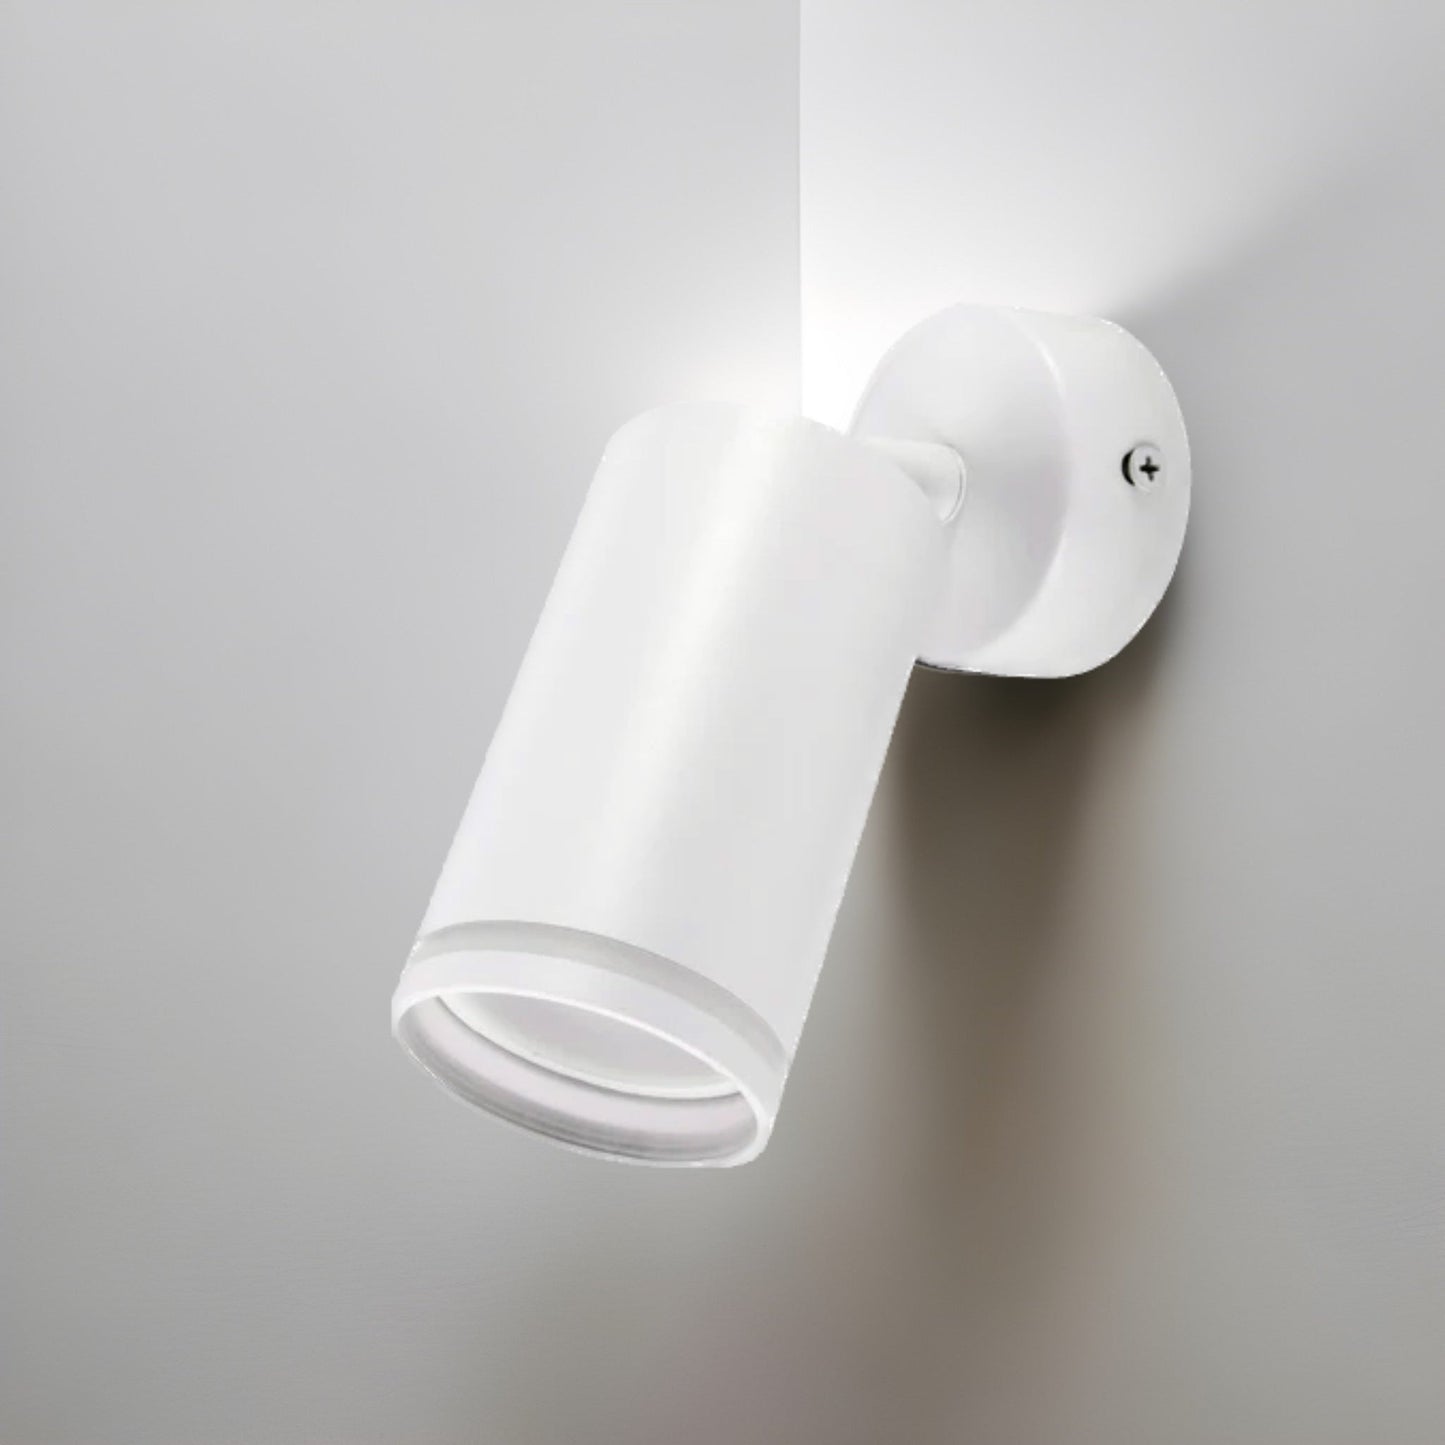 The white LED Oli spot light consists of a cylindrical spotlight, which can be tilted and adjusted on its own axis. The spotlight is attached to a circular base, which makes it equally suitable for mounting on walls and ceilings. Made of an aluminum body and powder coated white, this ceiling spot light design fits well into different spaces. Whether functional office or cozy home - the timeless lamp is an perfect for many types of use.